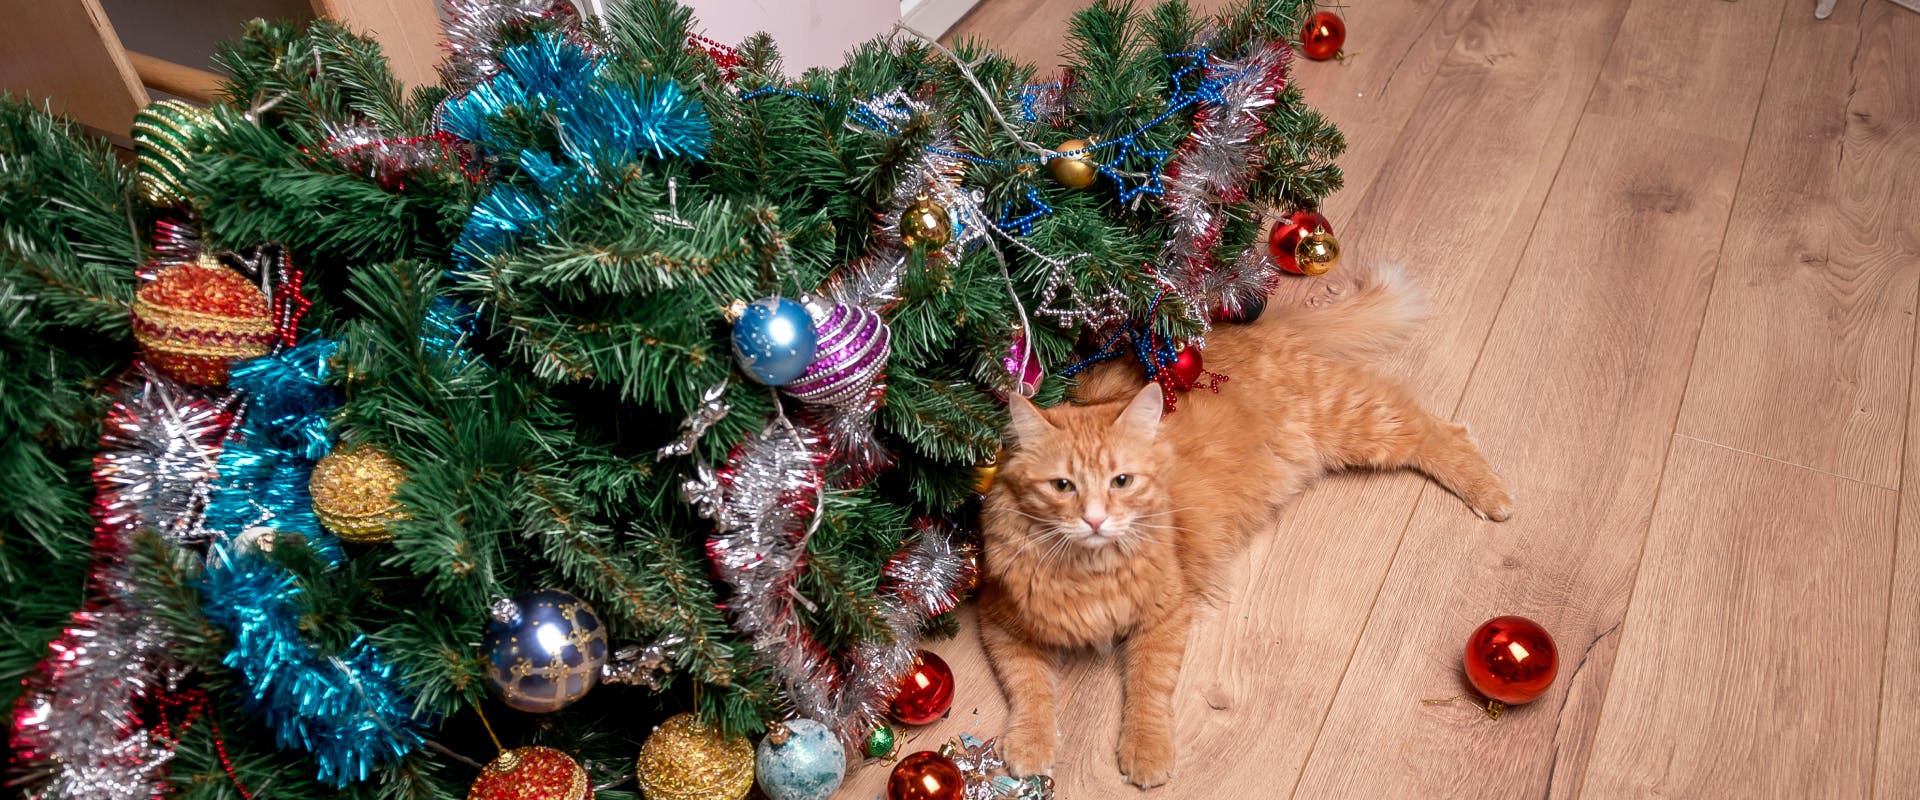 a long haired ginger tabby cat lying next to a fallen Christmas tree